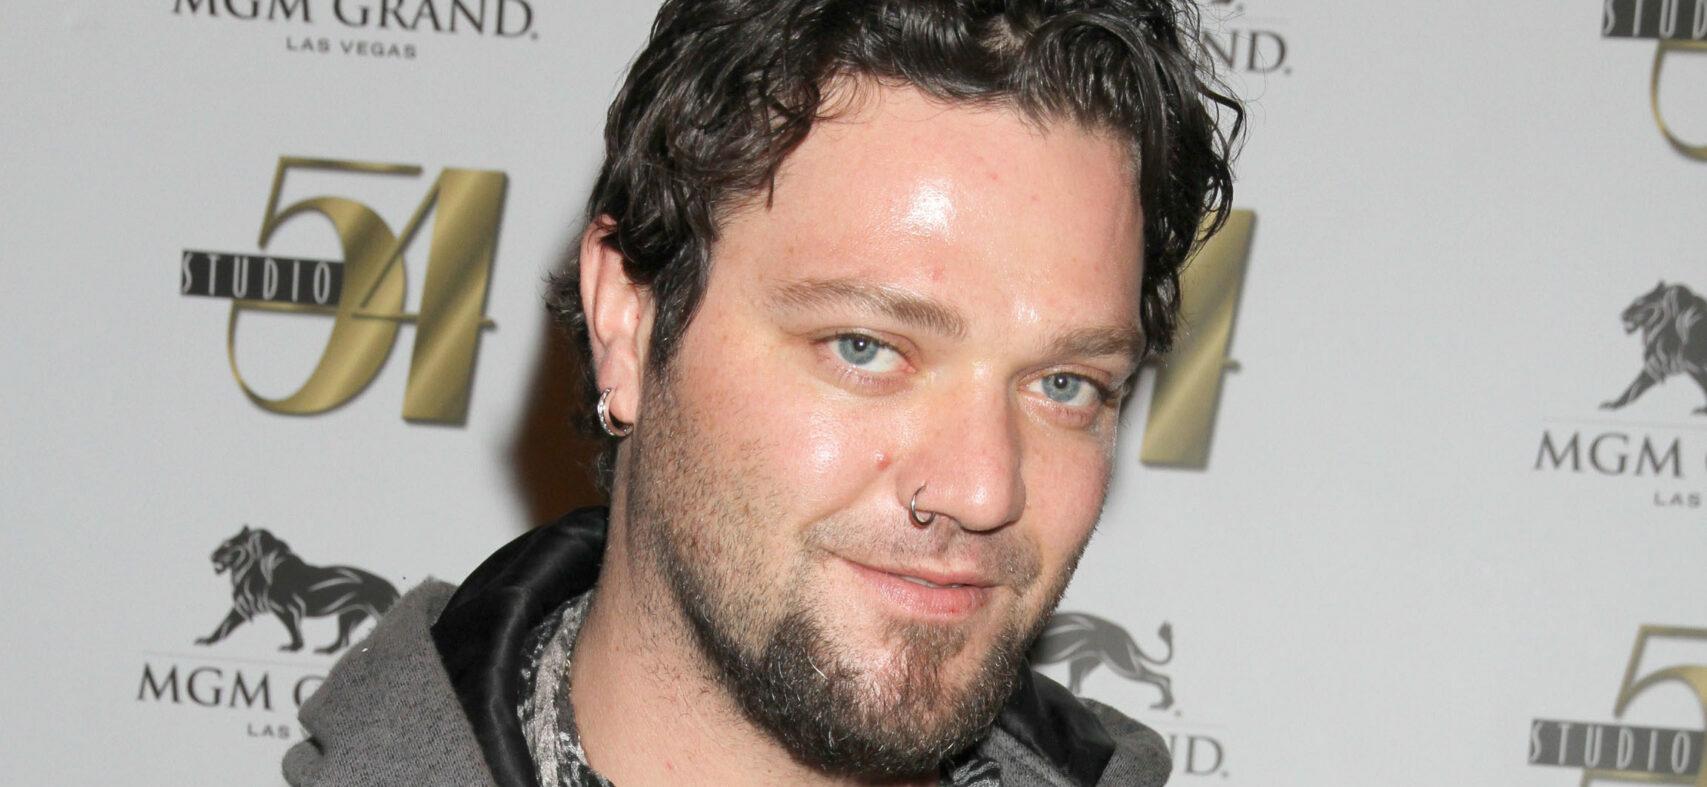 Bam Margera Reveals Why He Would Never Be Part Of A ‘Jackass’ Movie Again